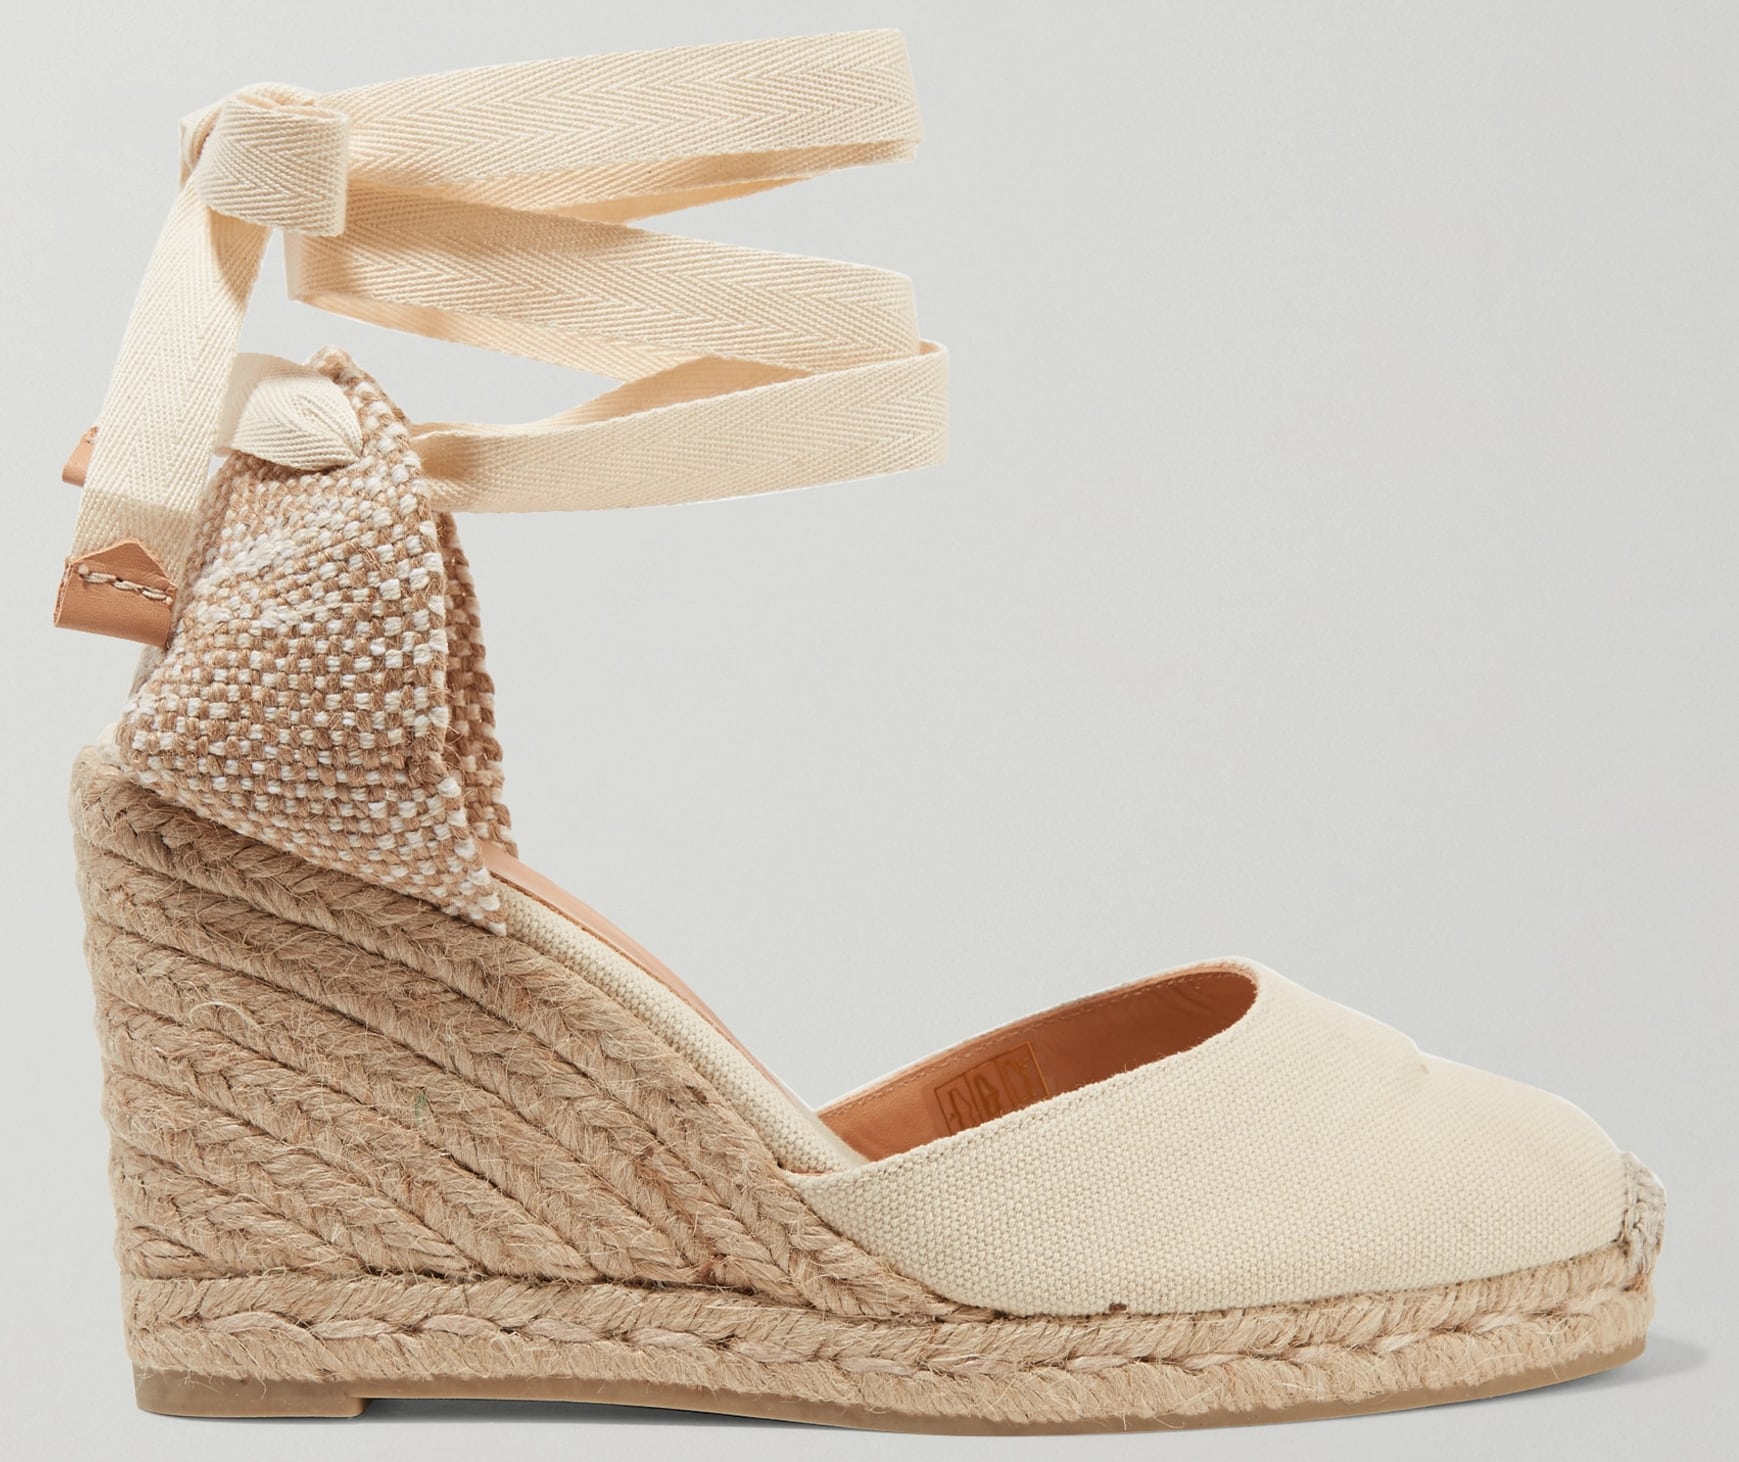 The Castaner Carina features a canvas upper, lace-up straps, and jute wedge heels